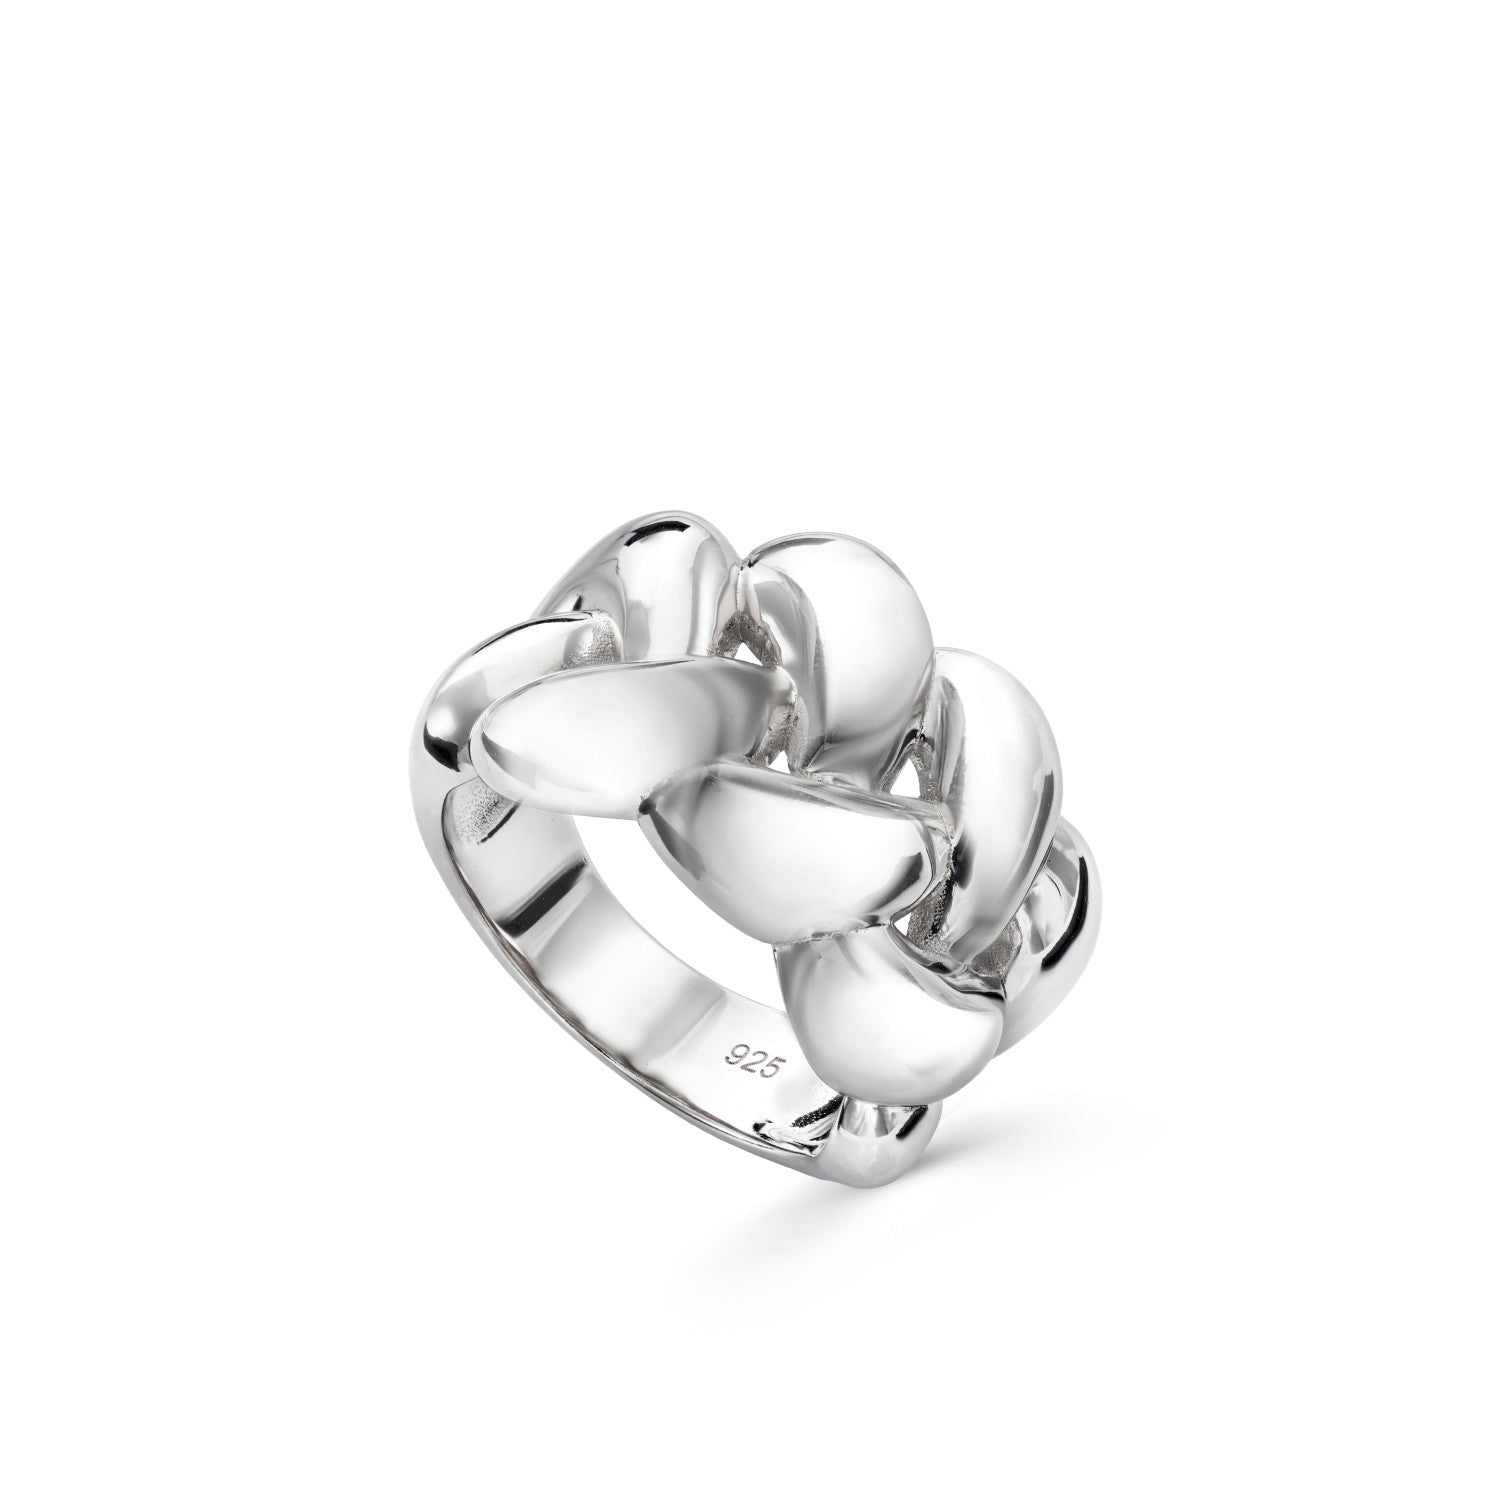 Wide interlocking design and plain silver rings